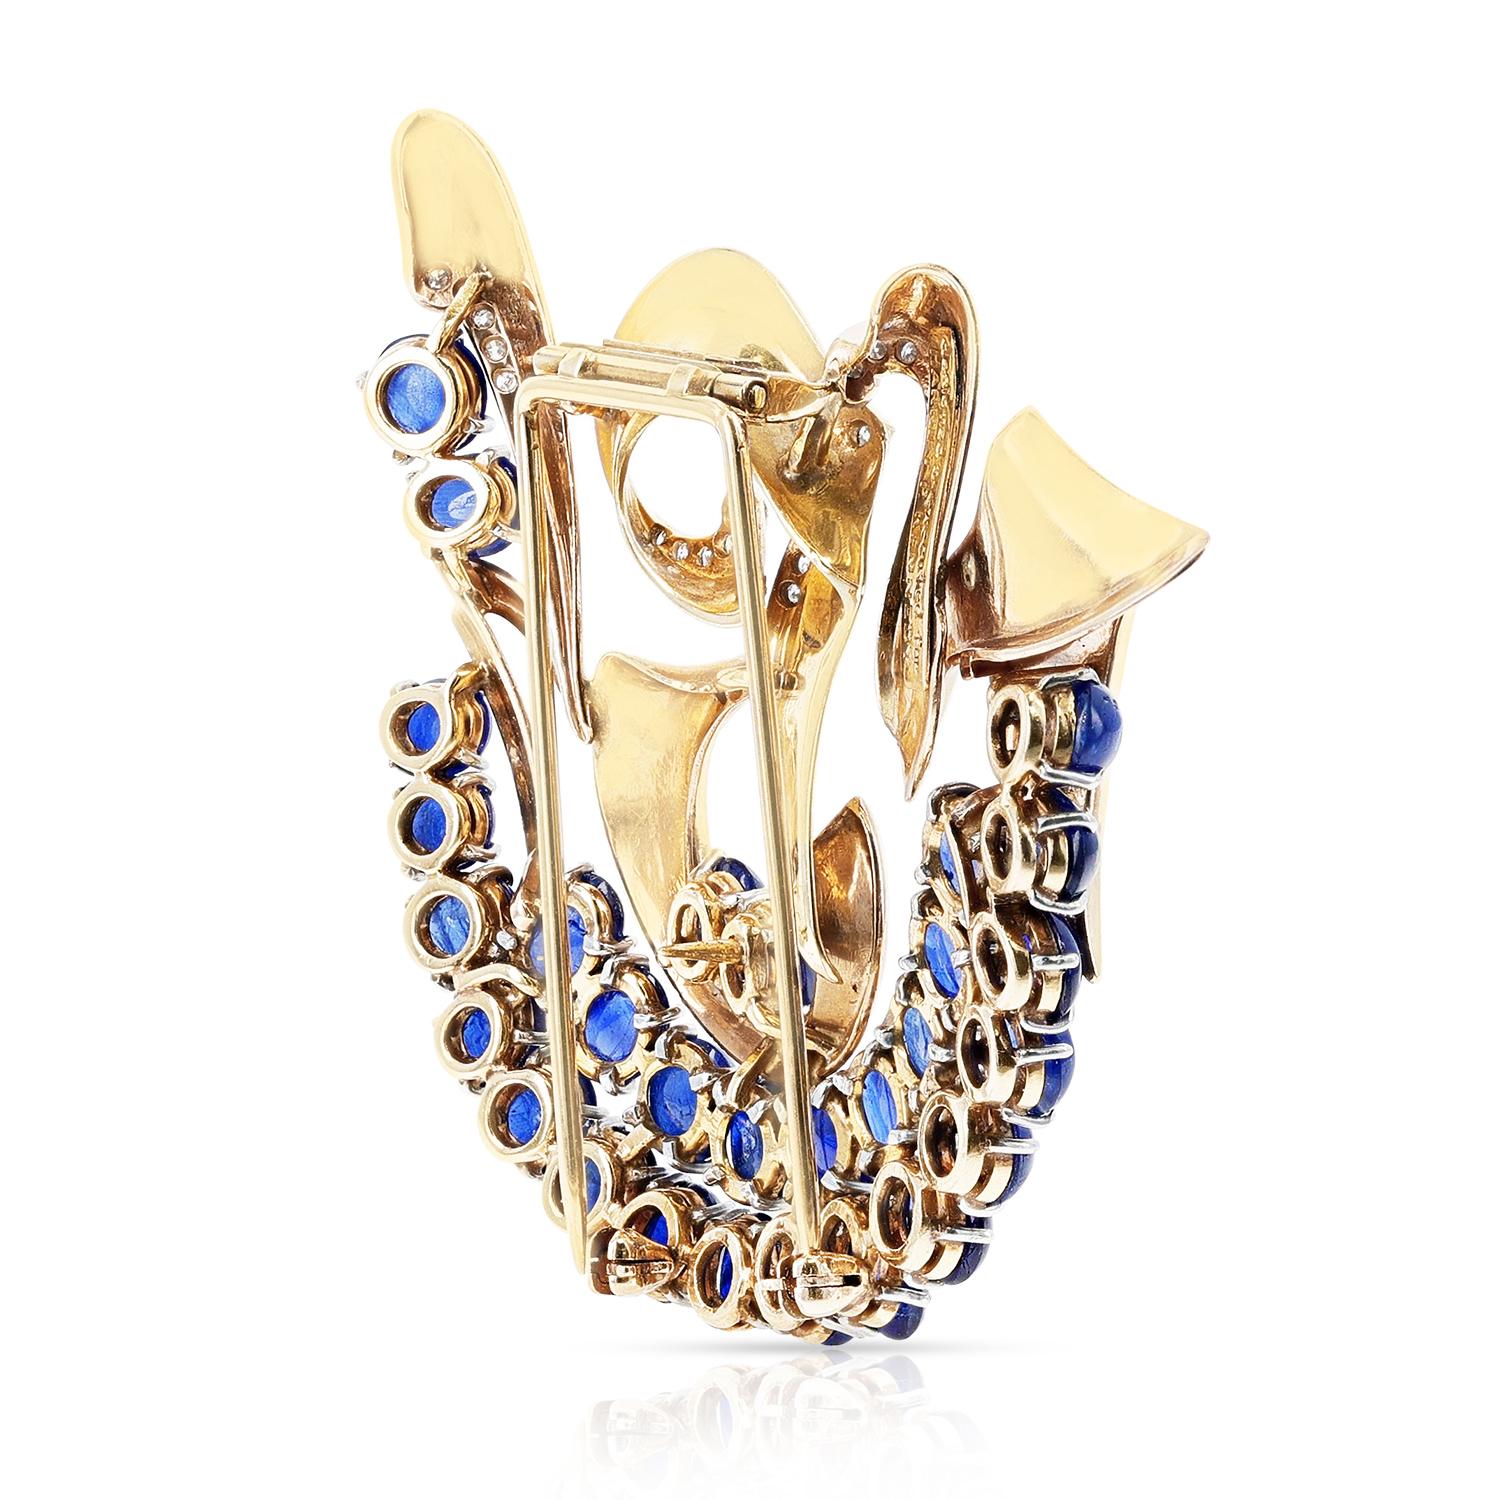 Women's or Men's Mauboussin Reflection Collection 29 Sapphire Cabochon and Diamonds Brooch